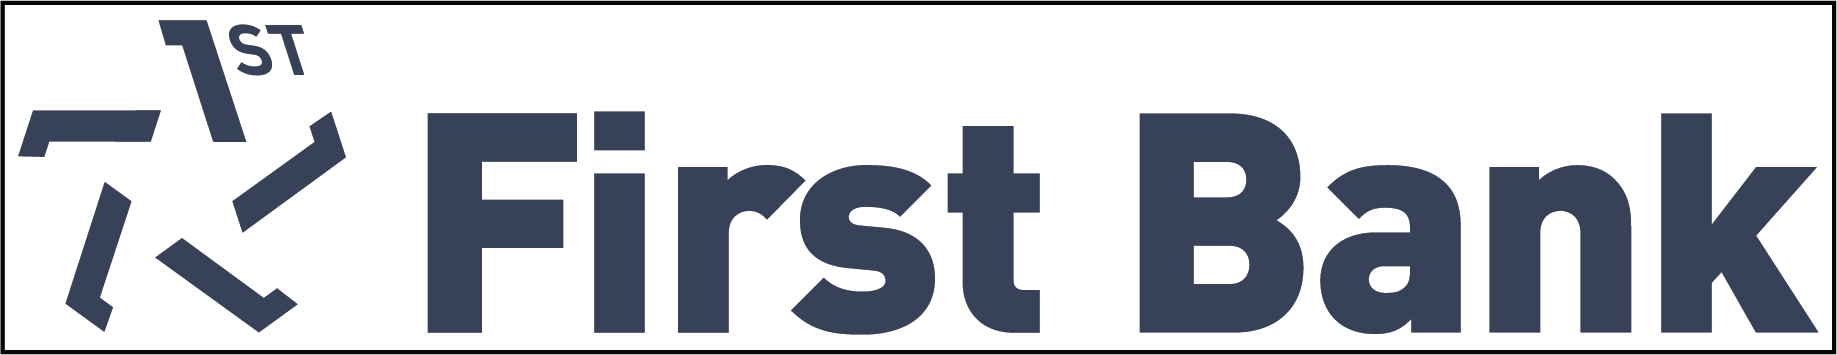 First-Bank-Logo-Blue-White-Background.png